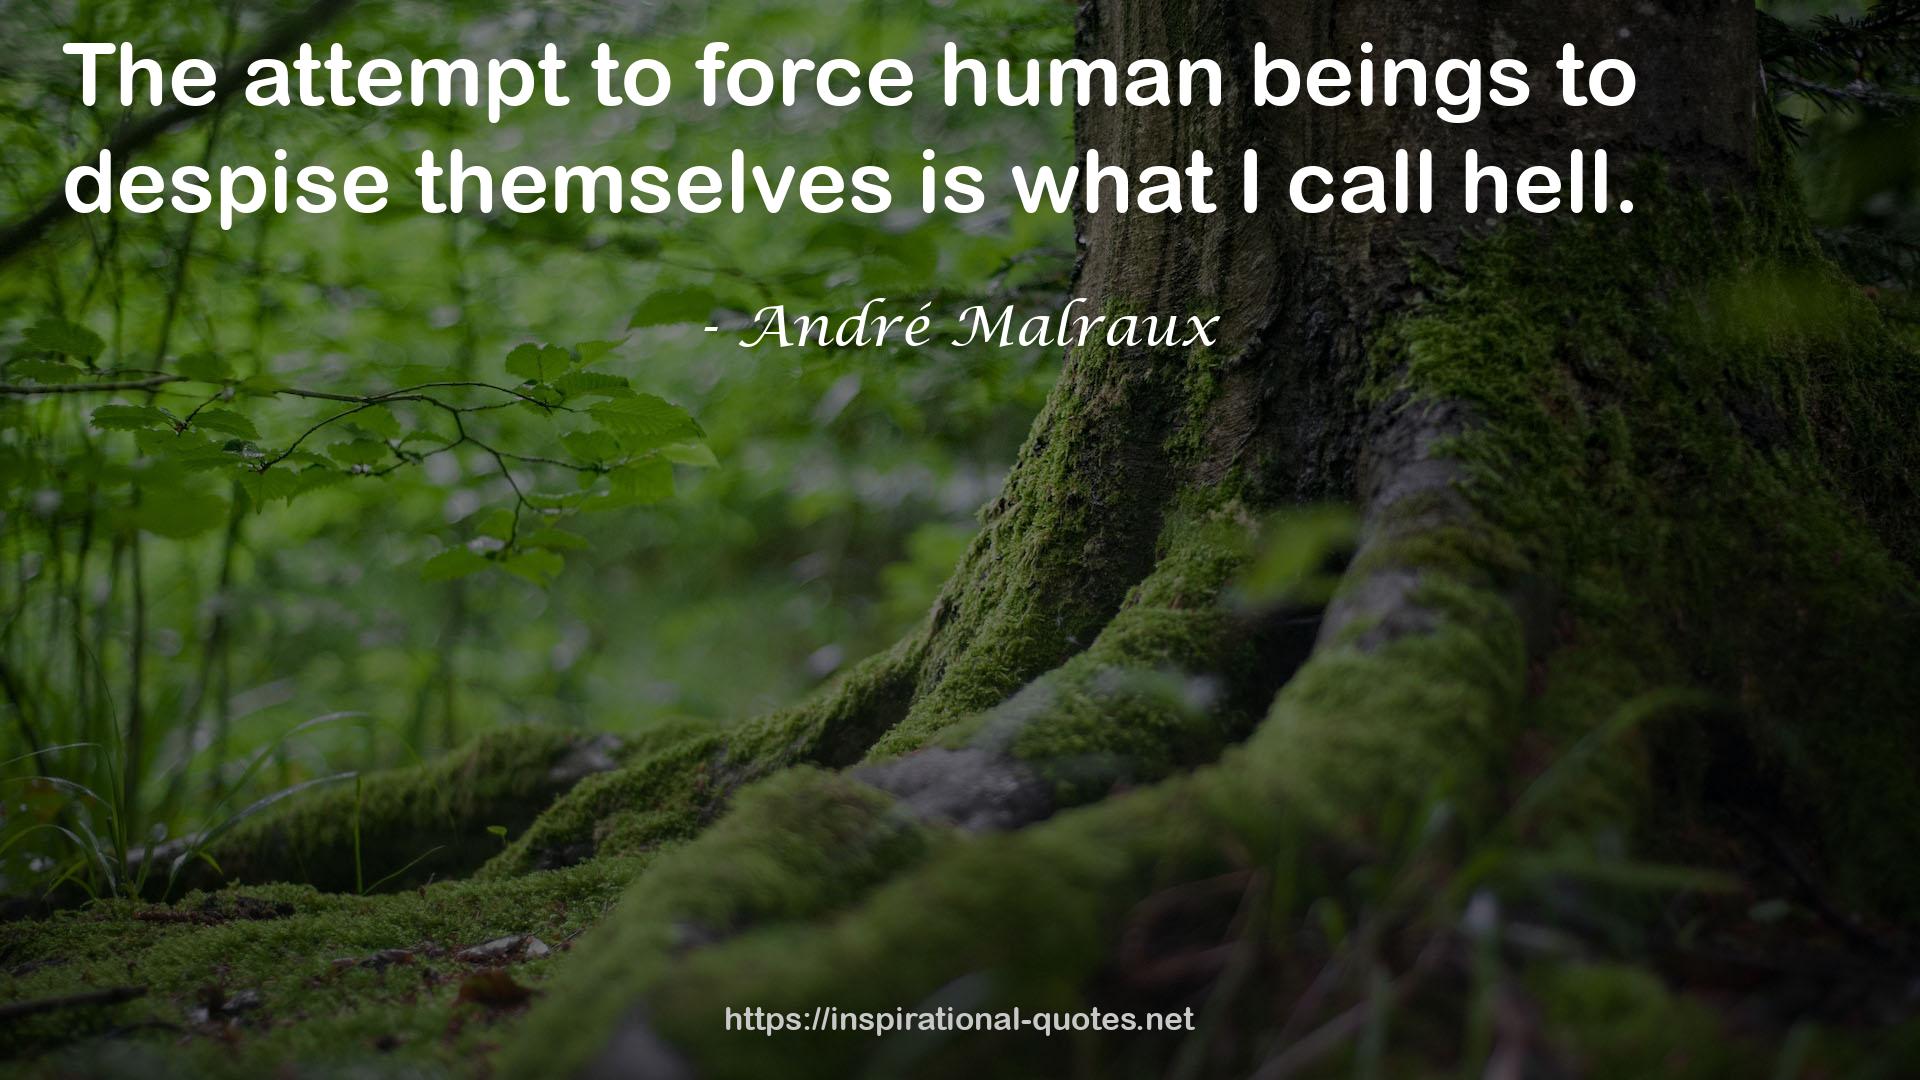 André Malraux QUOTES